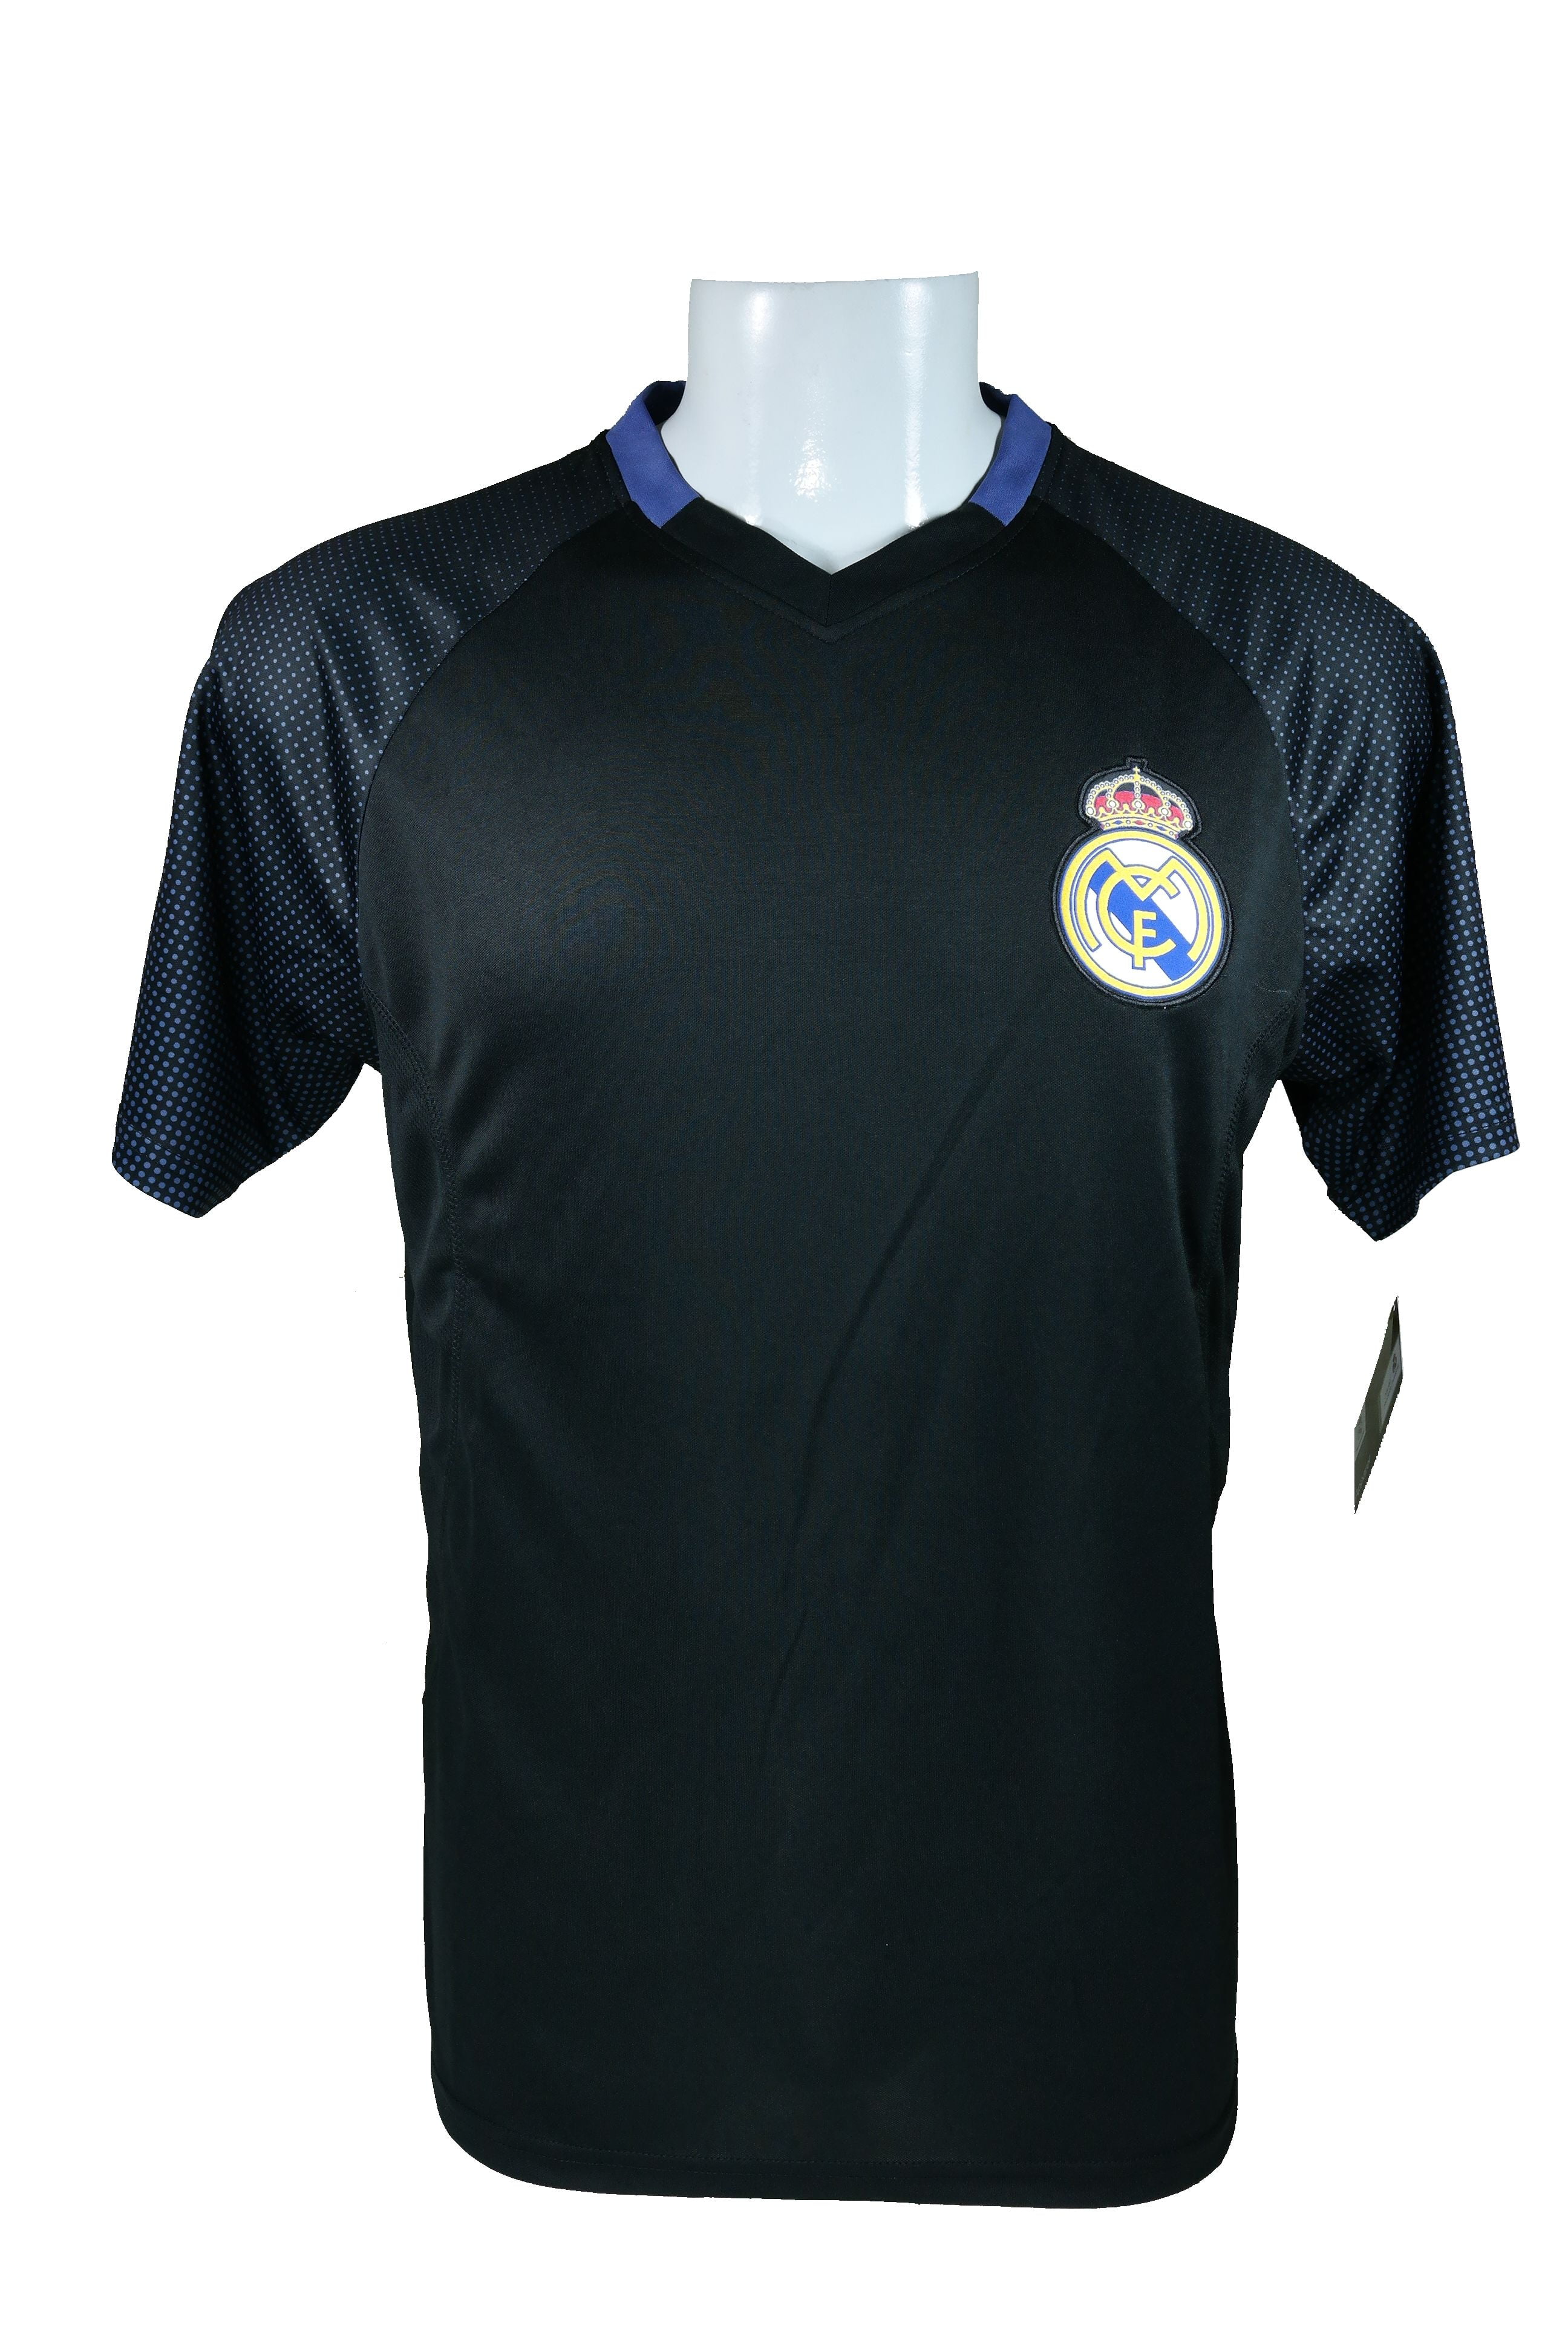 29 Icon Sports Group Real Madrid Officially Licensed Soccer Poly Shirt Jersey 